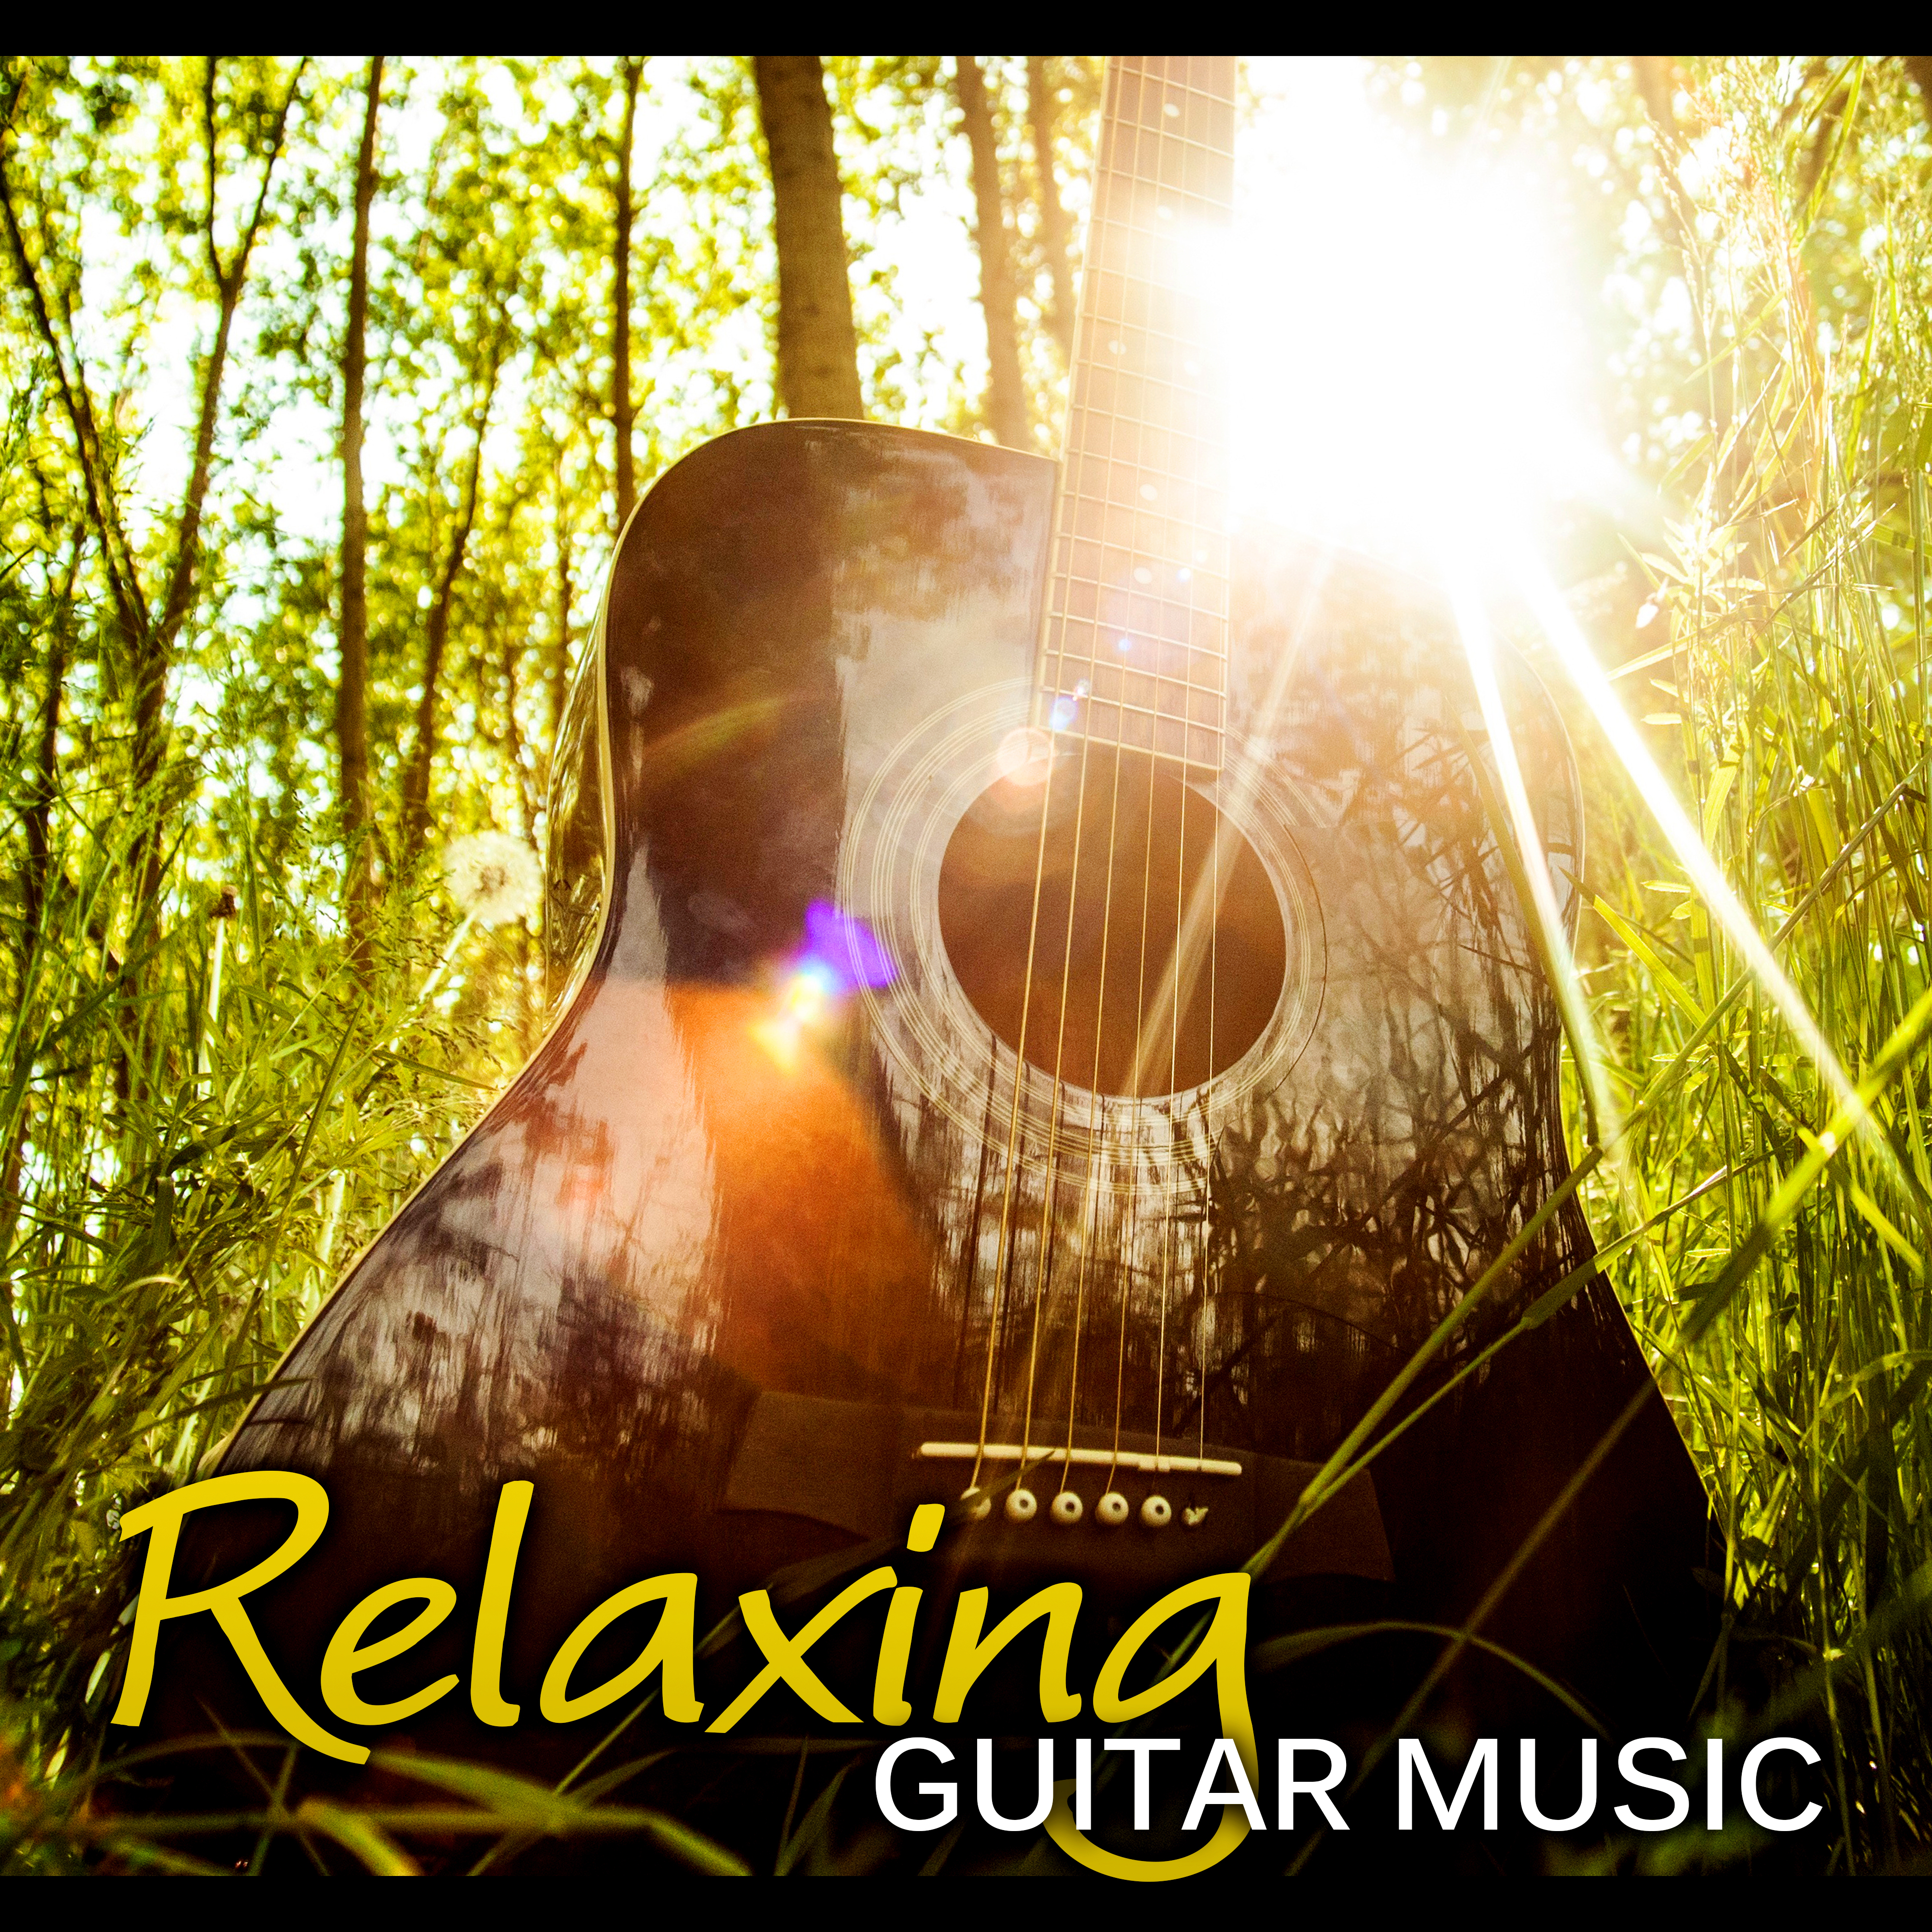 Relaxing Guitar Music – The Best Relaxing Music in the World, Acoustic Guitar, Smooth Jazz, Dinner Party Background Music, Spanish Guitar Instrumental Songs